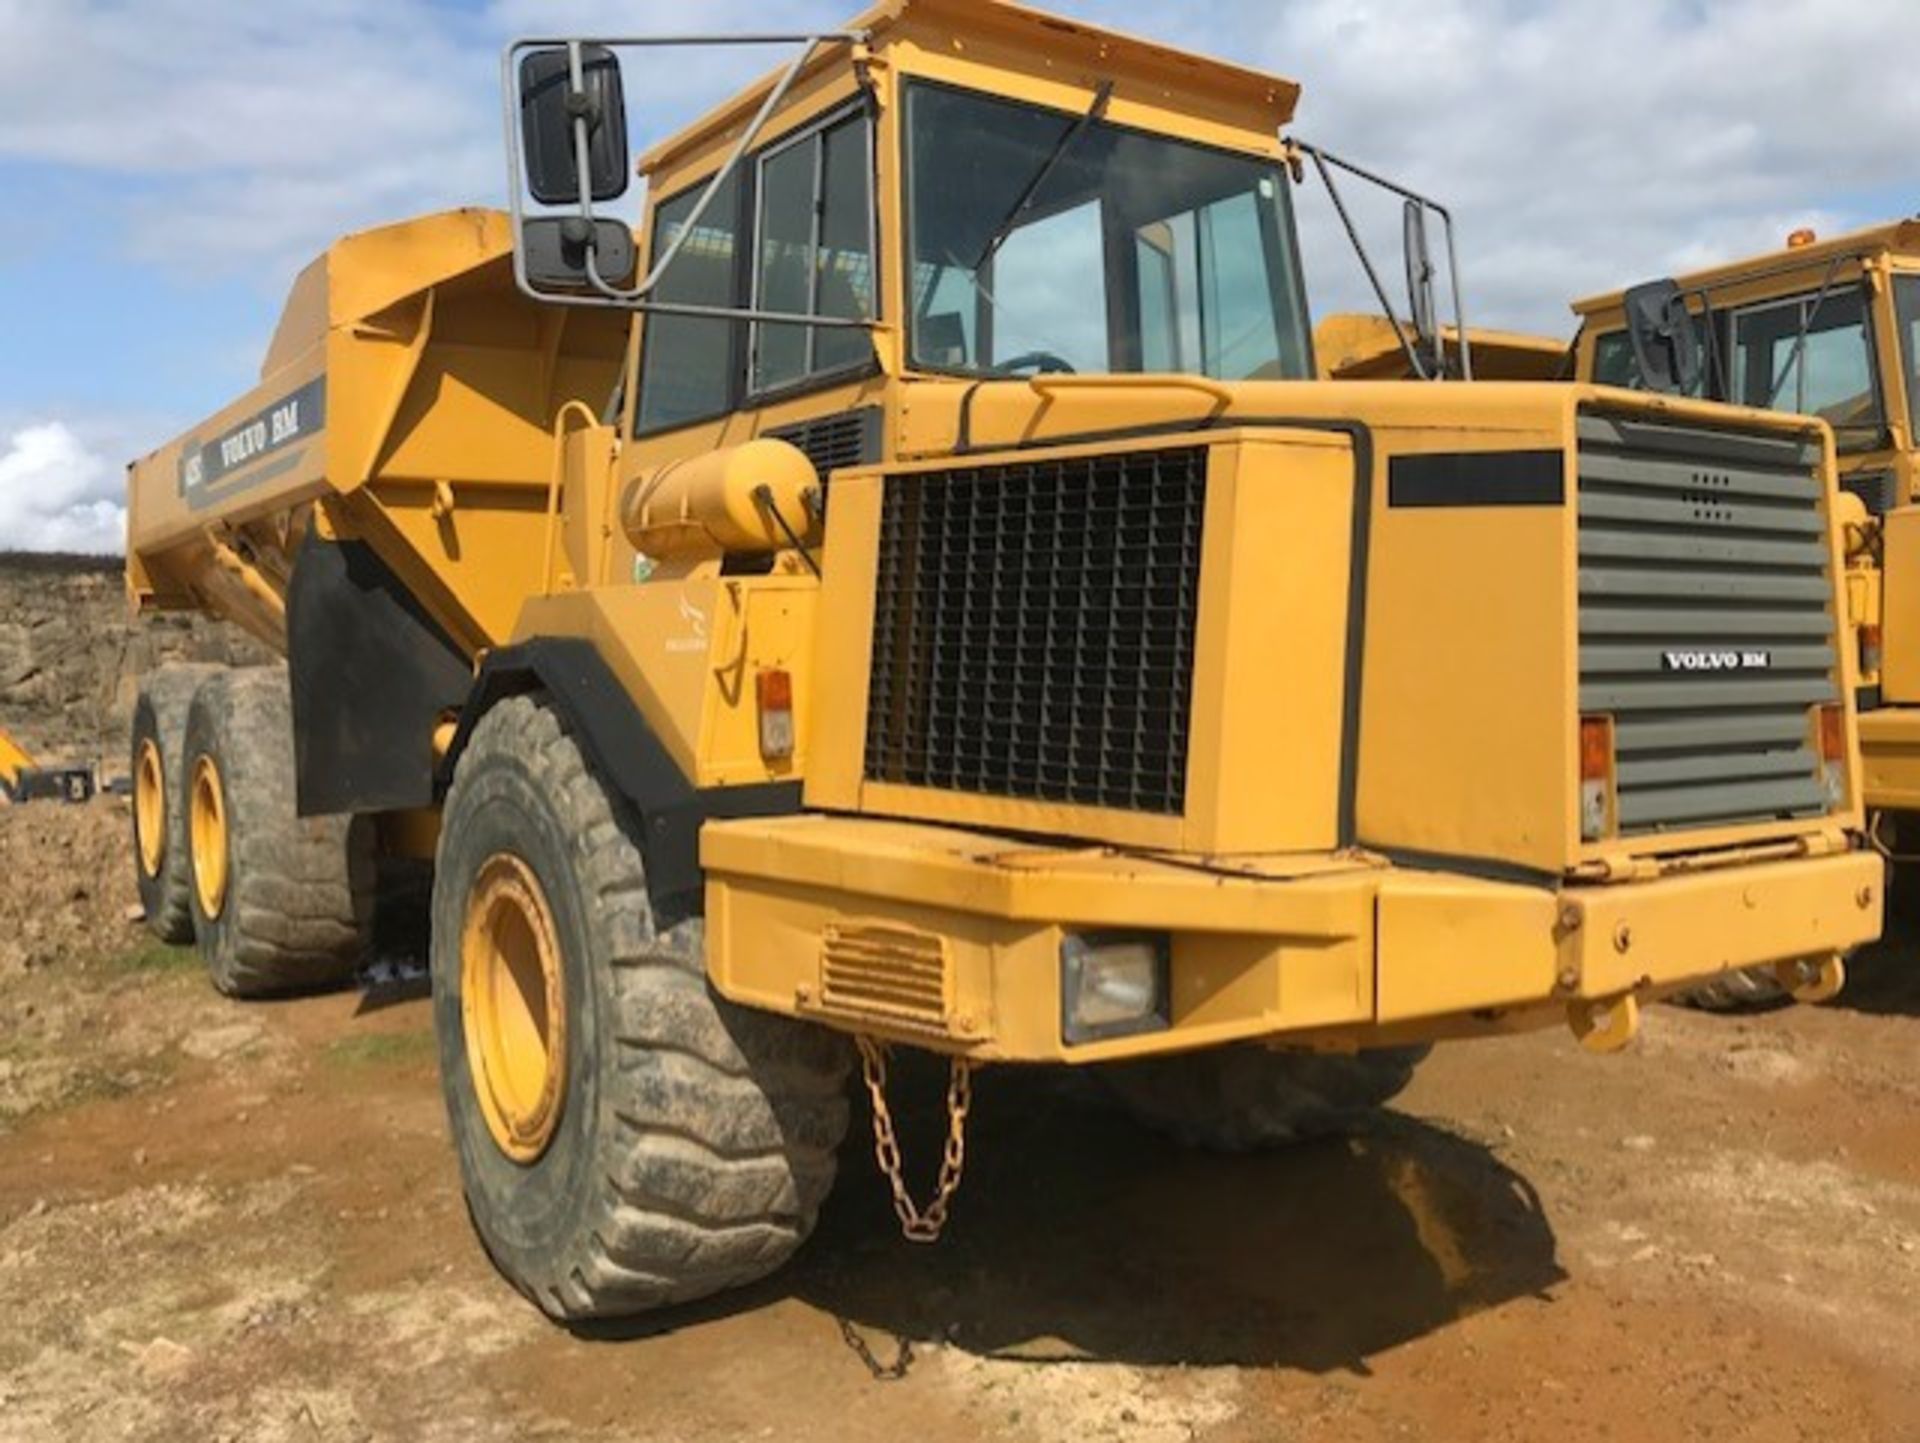 Volvo AC 25 dump truck just done quarry work guy , sellling due to not needed anymore as quarry is